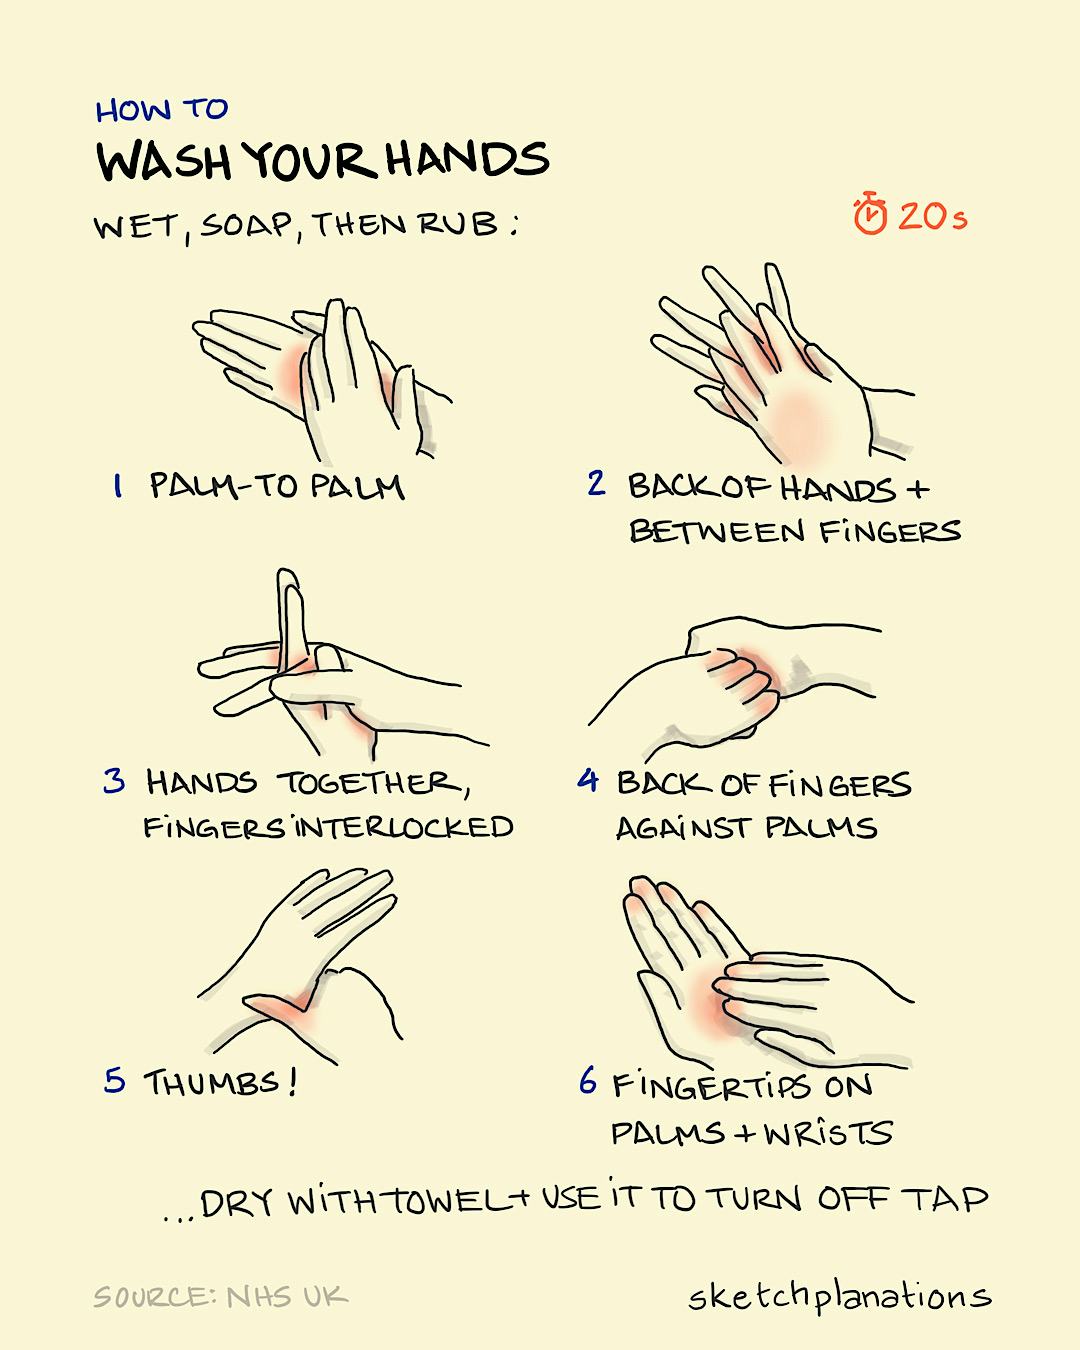 How to wash your hands - Sketchplanations